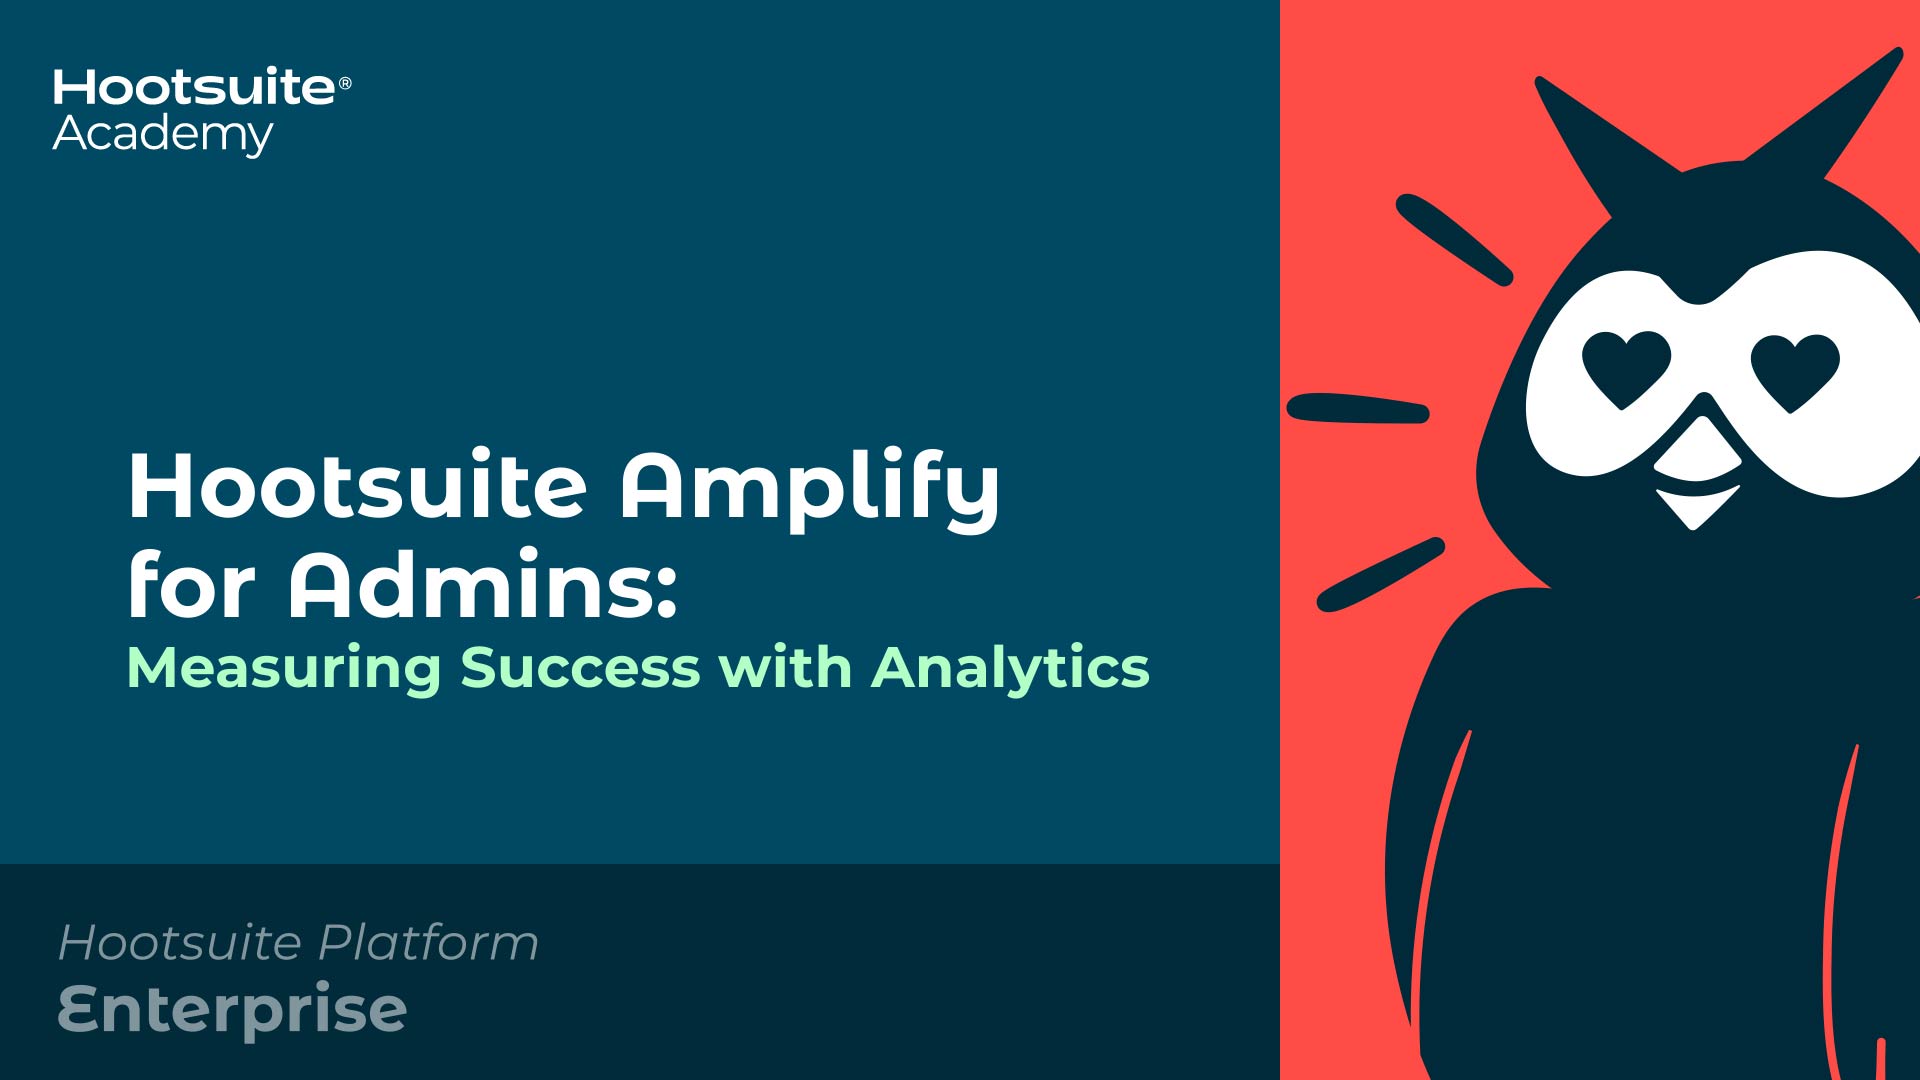 Hootsuite amplify for admins measuring success with analytics video.